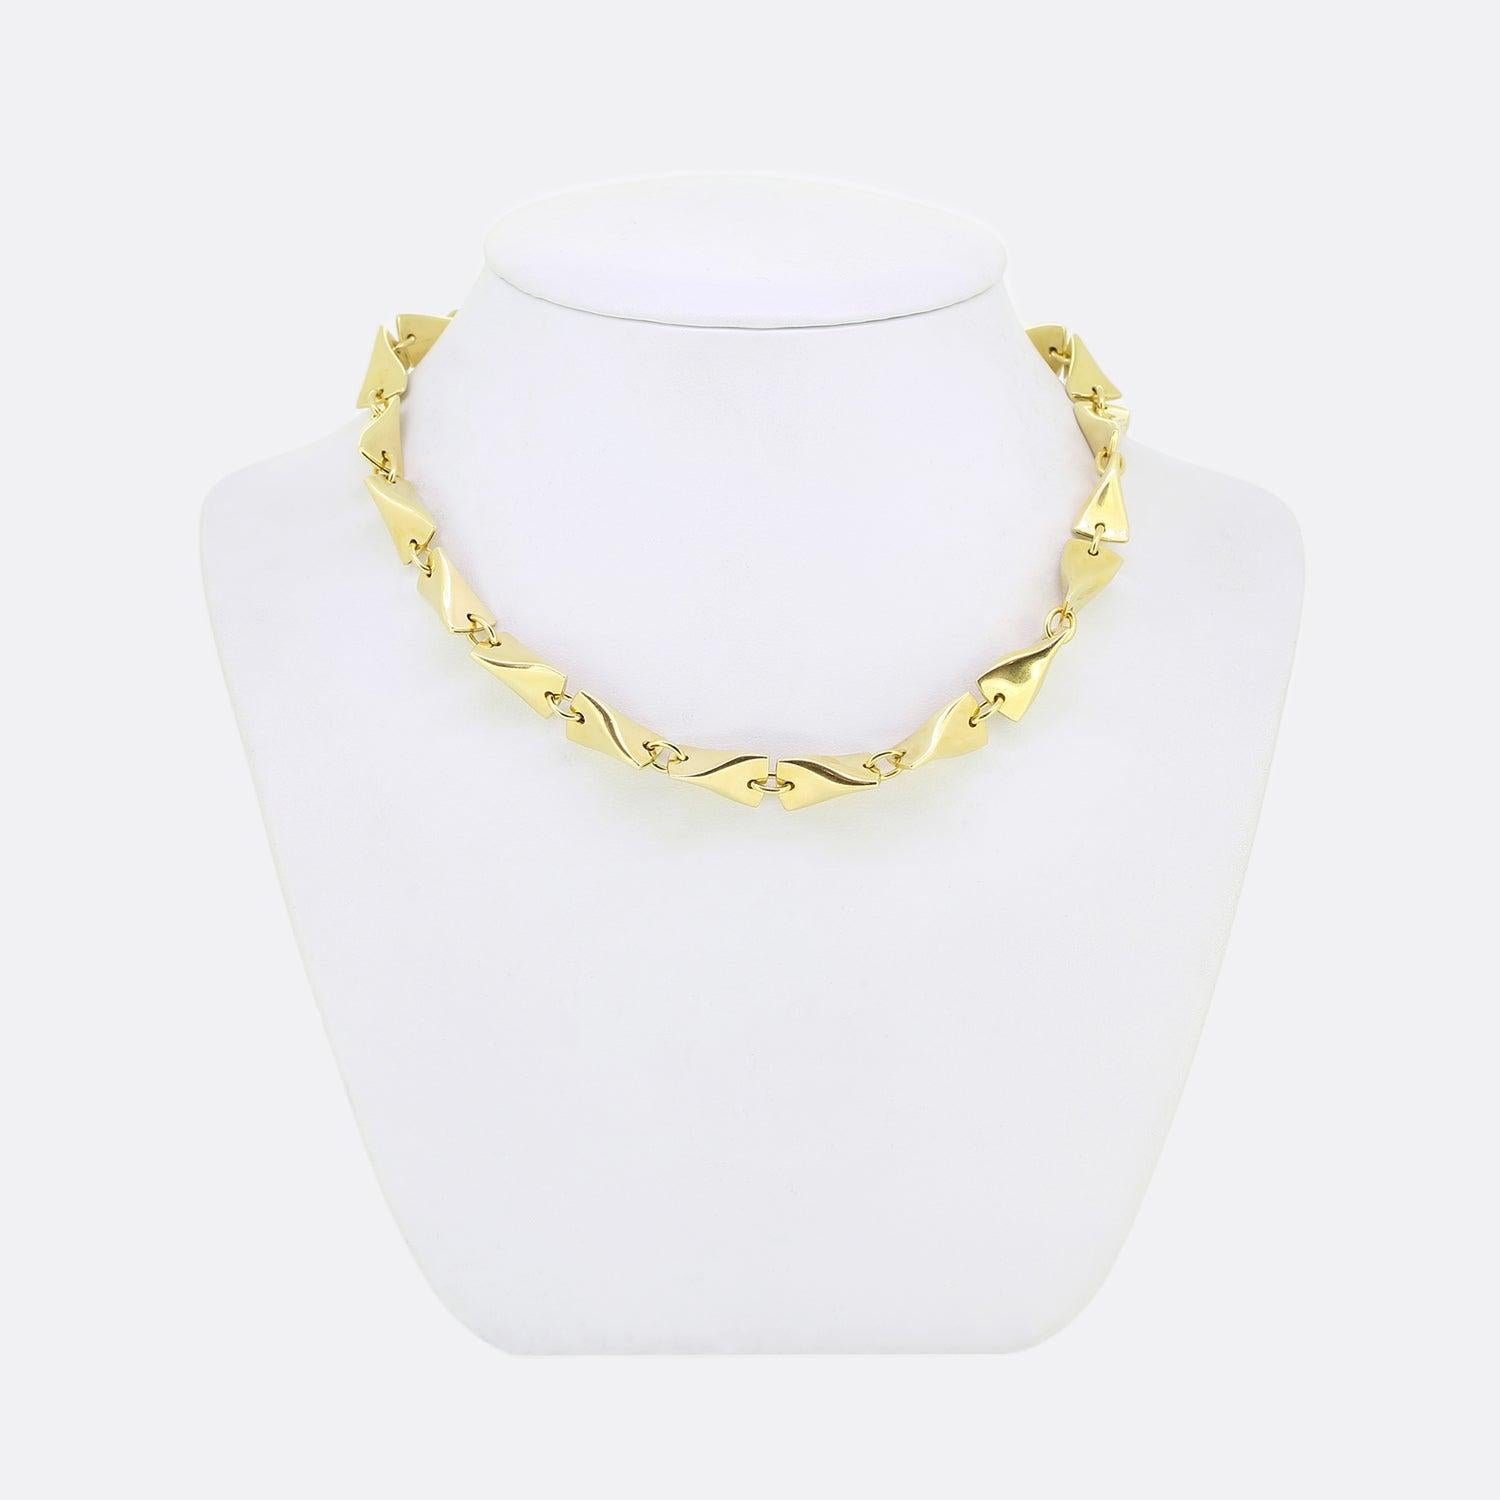 This is an 18ct yellow gold chain from the luxury jewellery designer Georg Jensen. The chain features fancy style links and weighs an impressive 64.5 grams.

Condition: Used (Very Good)
Weight: 64.5 grams
Chain Length: 15.5 inches (short)
Link